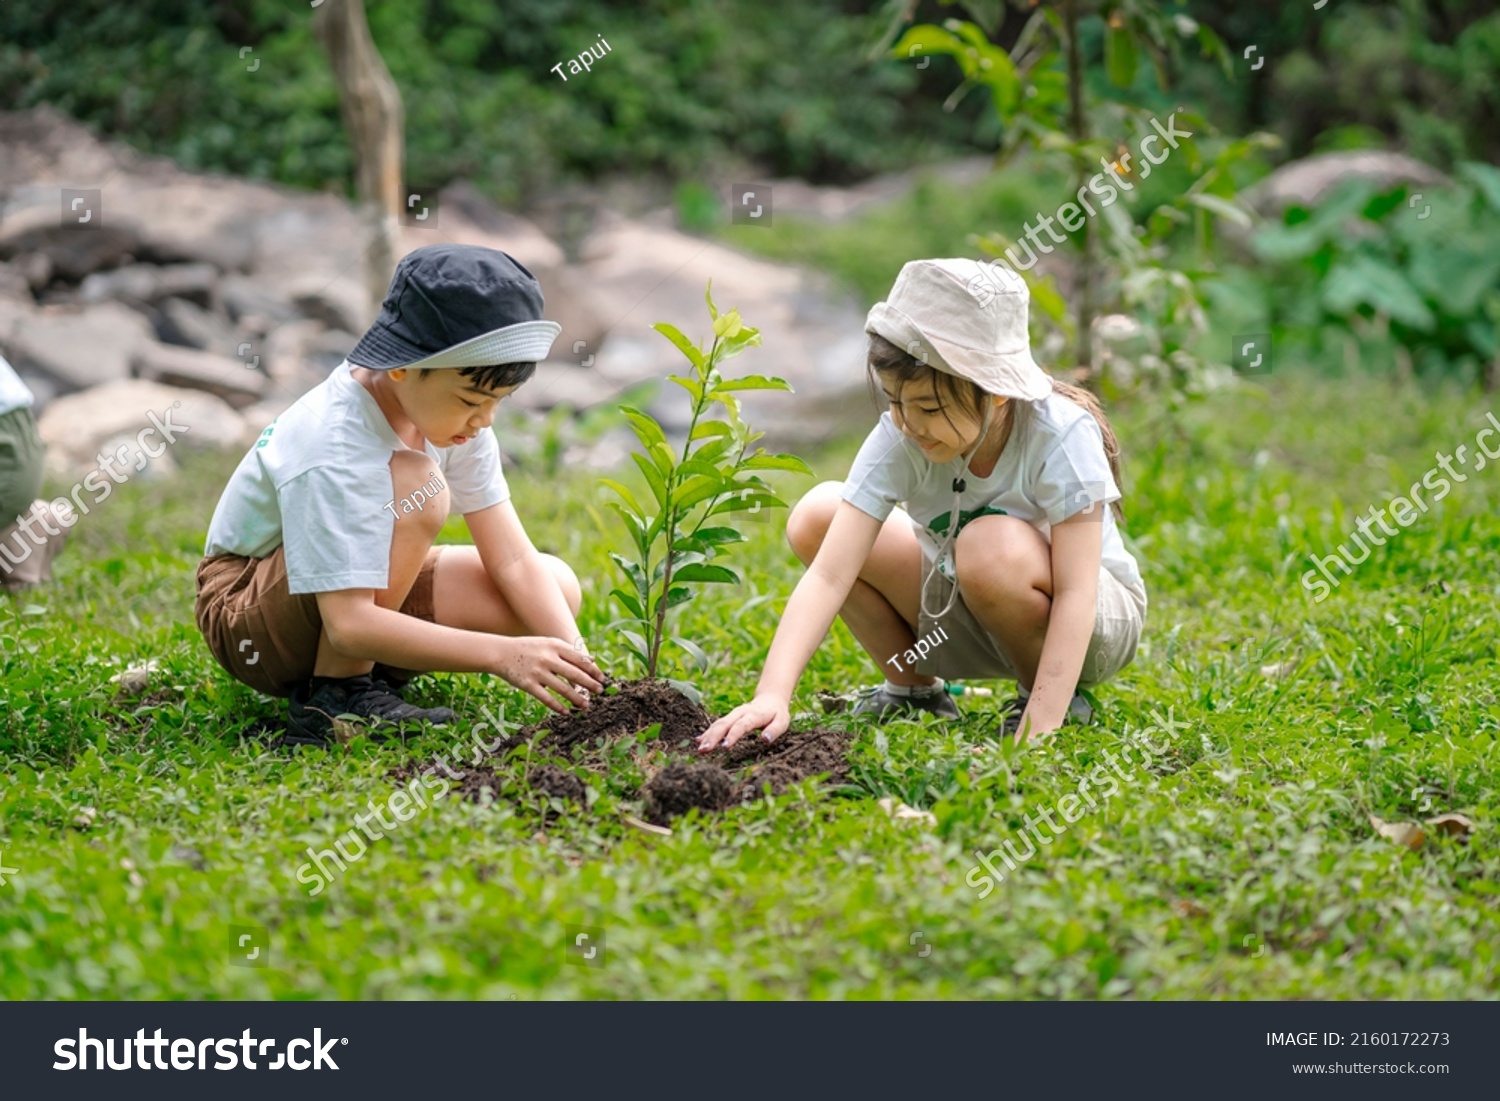 Children join as volunteers for reforestation, earth conservation activities to instill in children a sense of patience and sacrifice, doing good deeds and loving nature. #2160172273